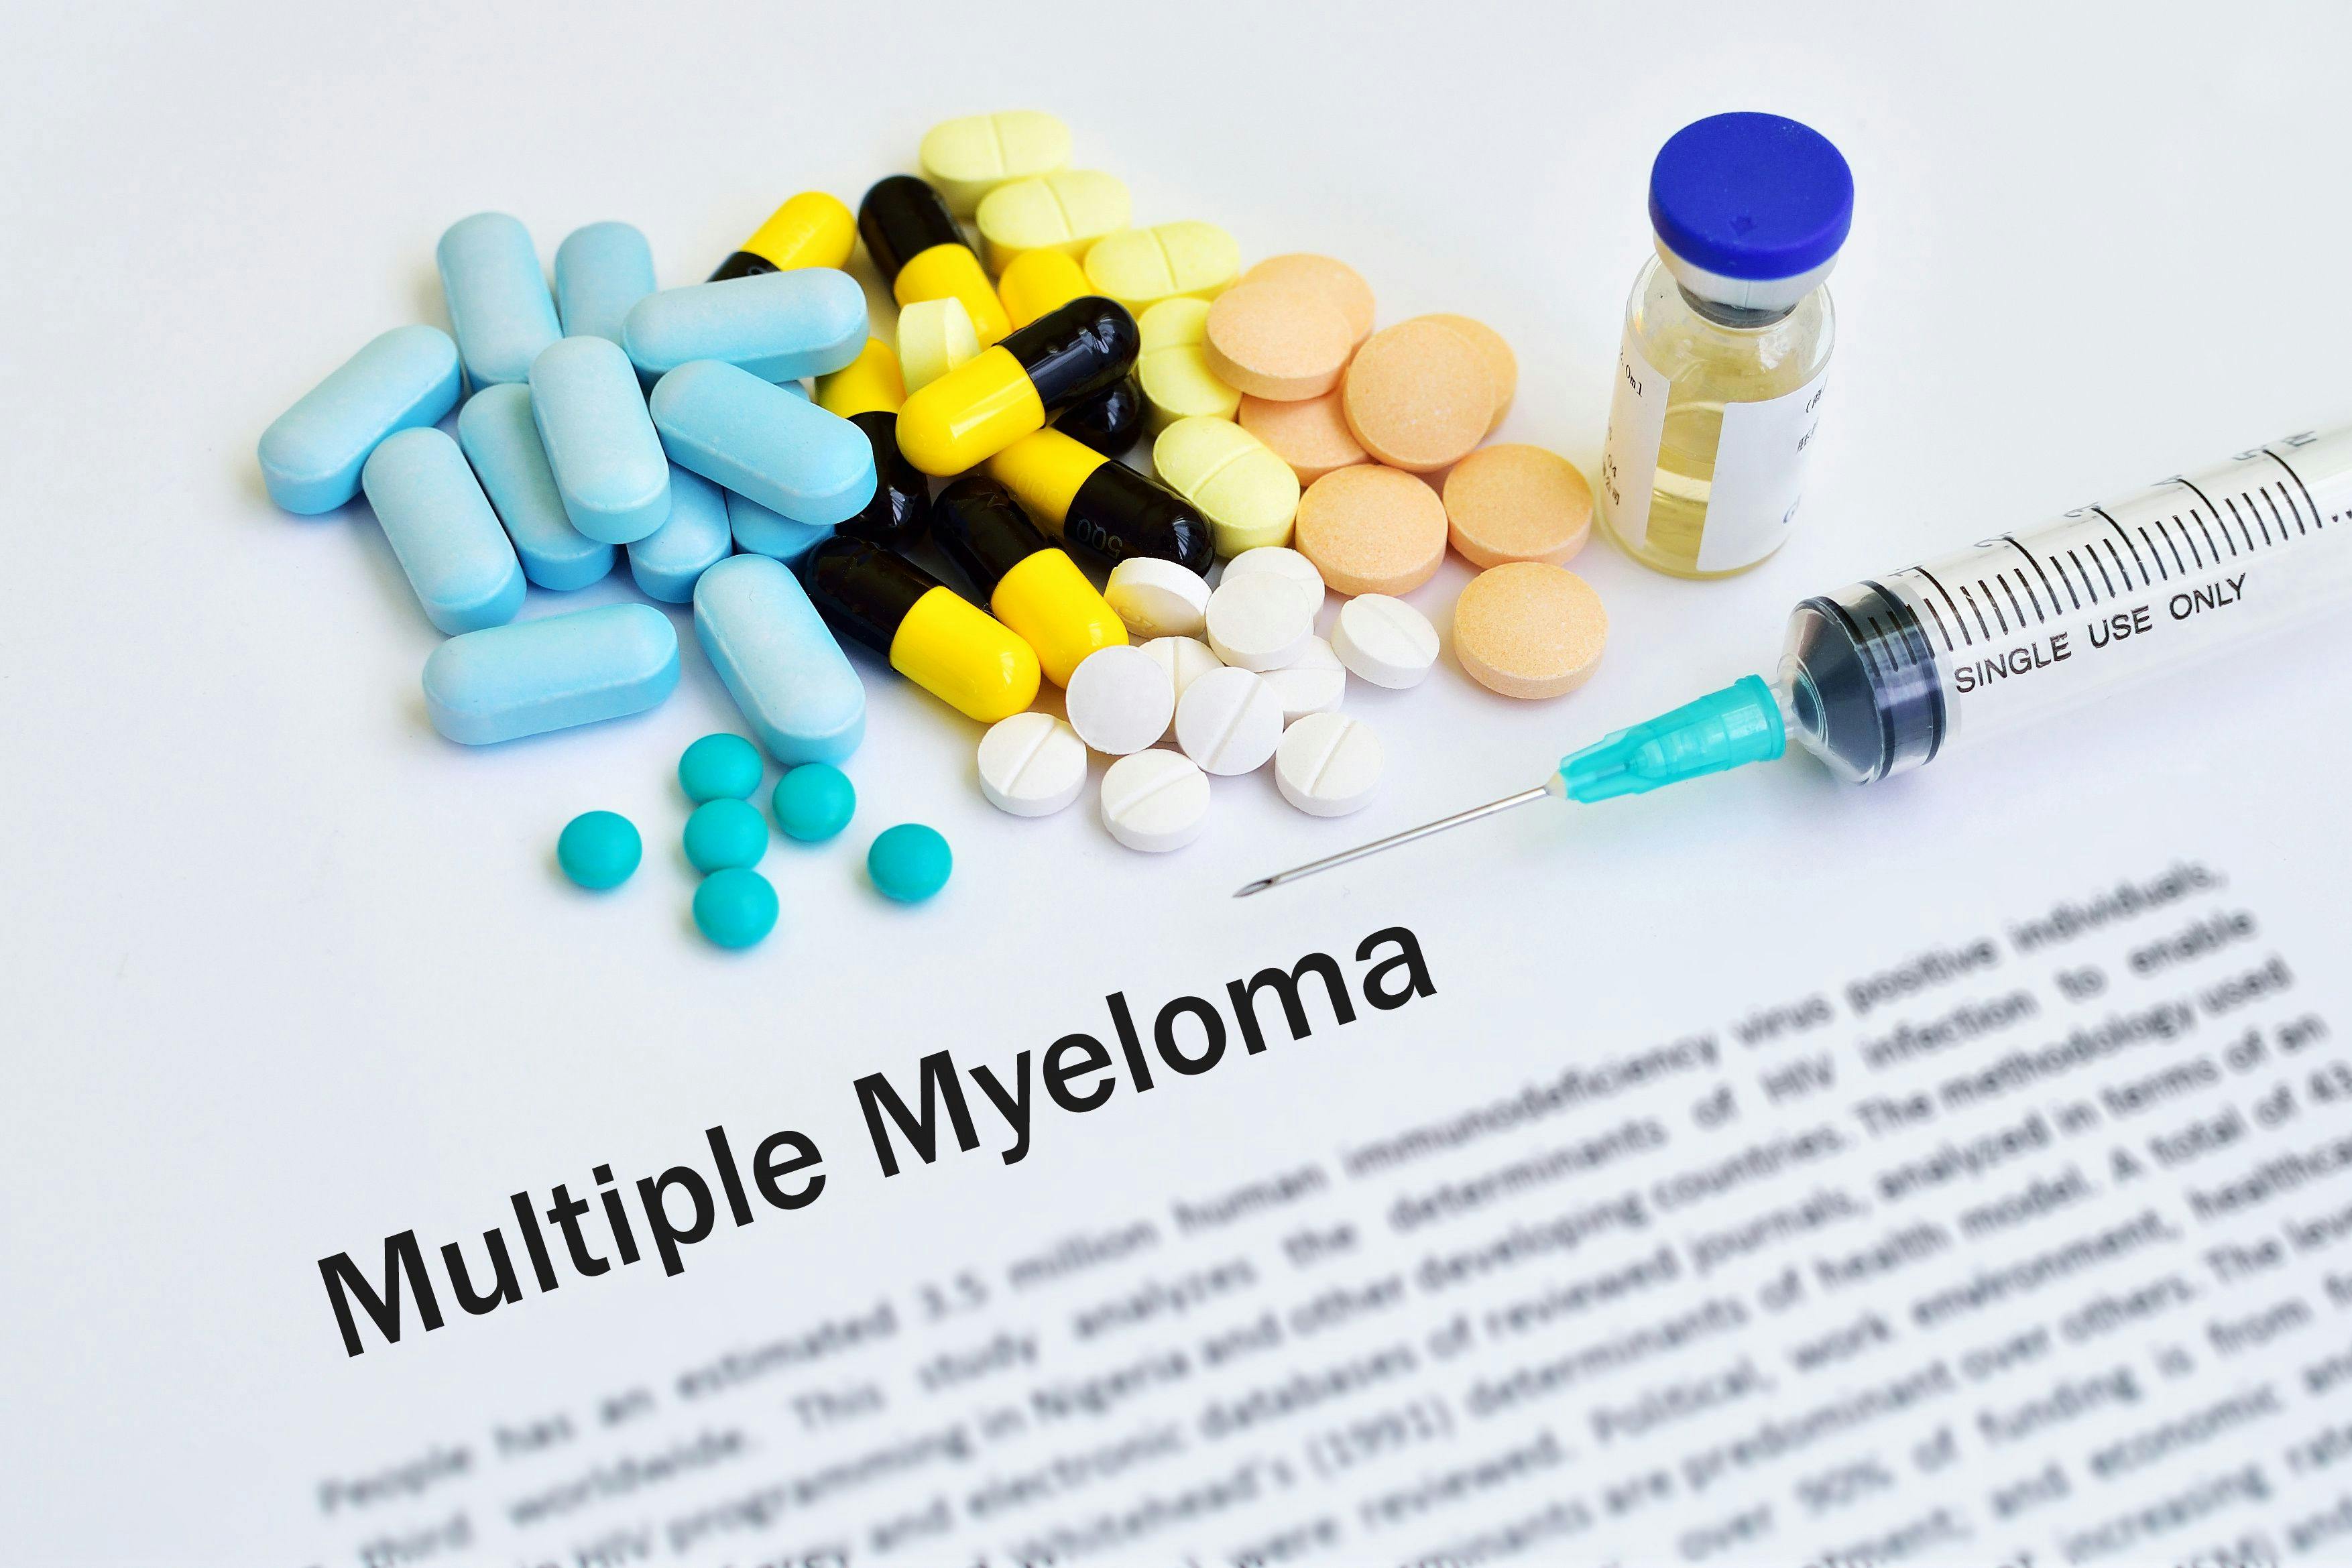 Many Factors Influence Which Cell-Based Treatment Options are Best for Patients with Multiple Myeloma, Expert Says